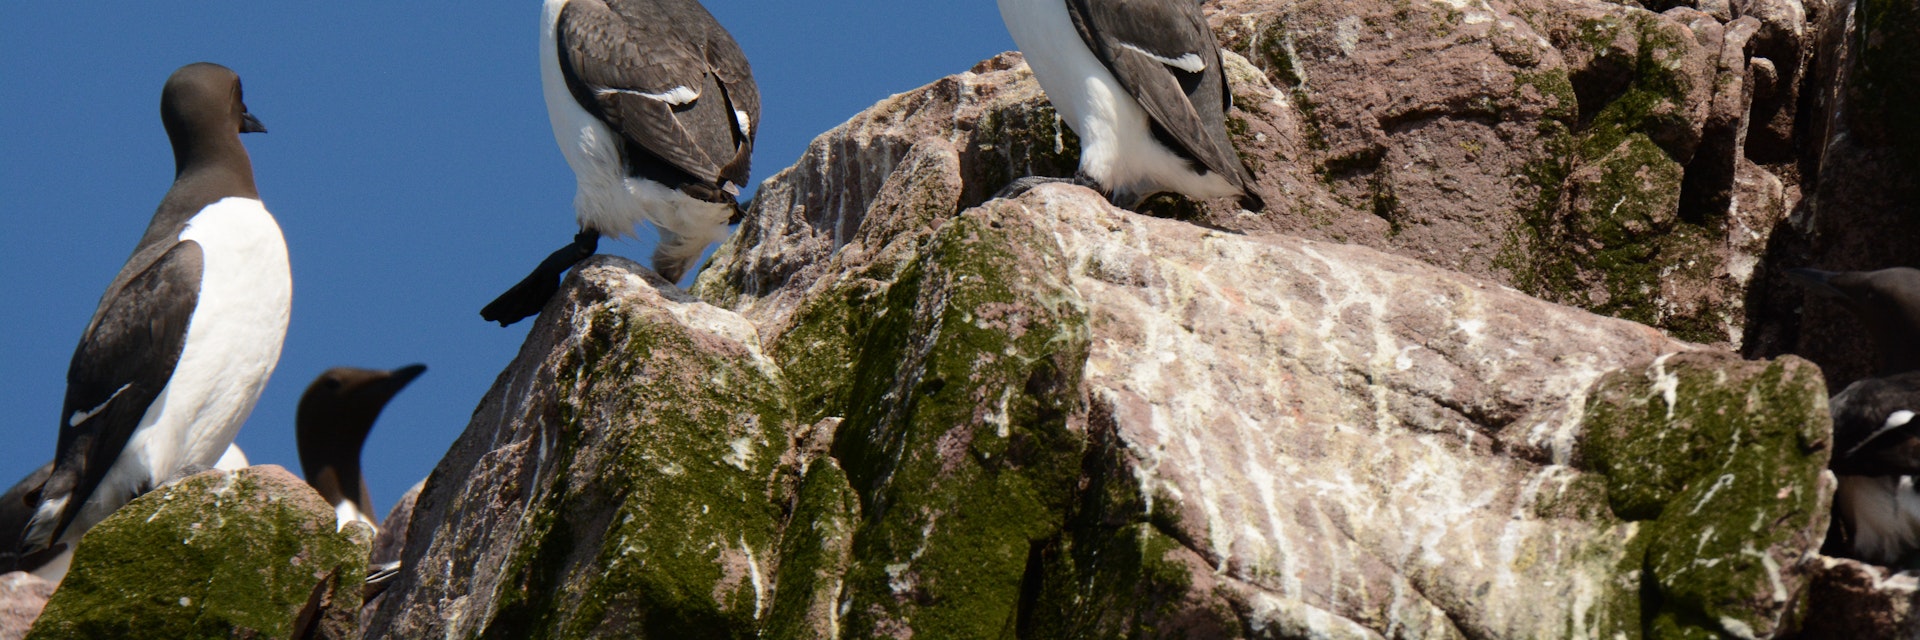 Witless Bay Ecological Reserve, Newfoundland, Canada. 20 June 2015. Common Murre at nesting colony. Uria aalge; Shutterstock ID 1882438741; full: 65050; gl: 65050; netsuite: POI; your: Erin Lenczycki
1882438741